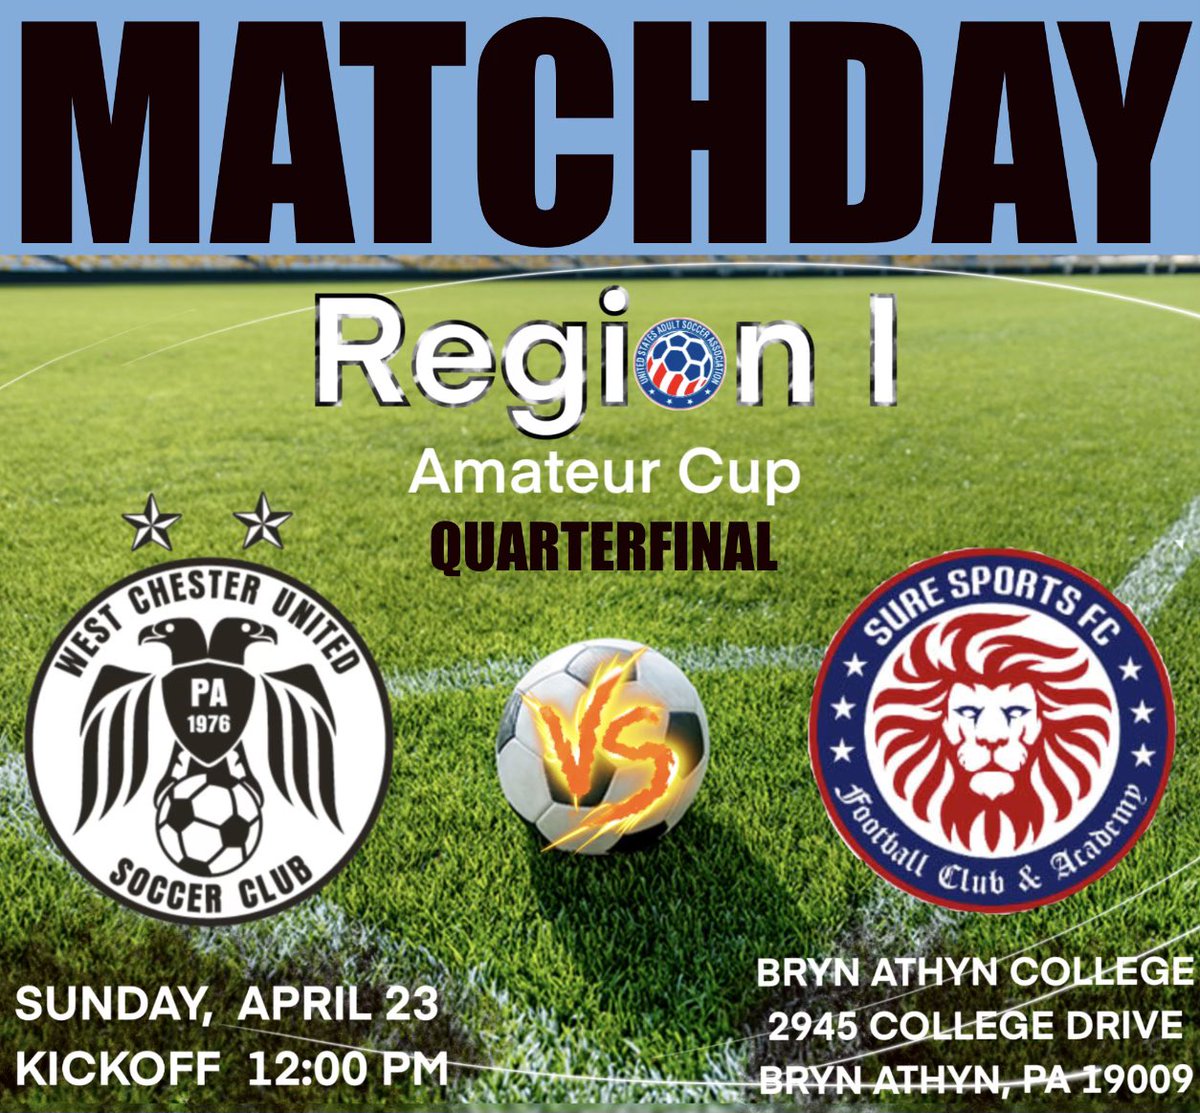 Beautiful MATCHDAY in PA for @USASARegion1. Noon kickoff @BrynAthynLions . Maryland Amateur Champ @SureSportsSC_MD v East PA Champ @WCUSCPredators in Regional Quarterfinal! @MattRalph_ @usopencup @USLLeagueTwo @USLPA @NPSLSoccer @PennFusion_SA @phlsoccernow @MichaelBattista